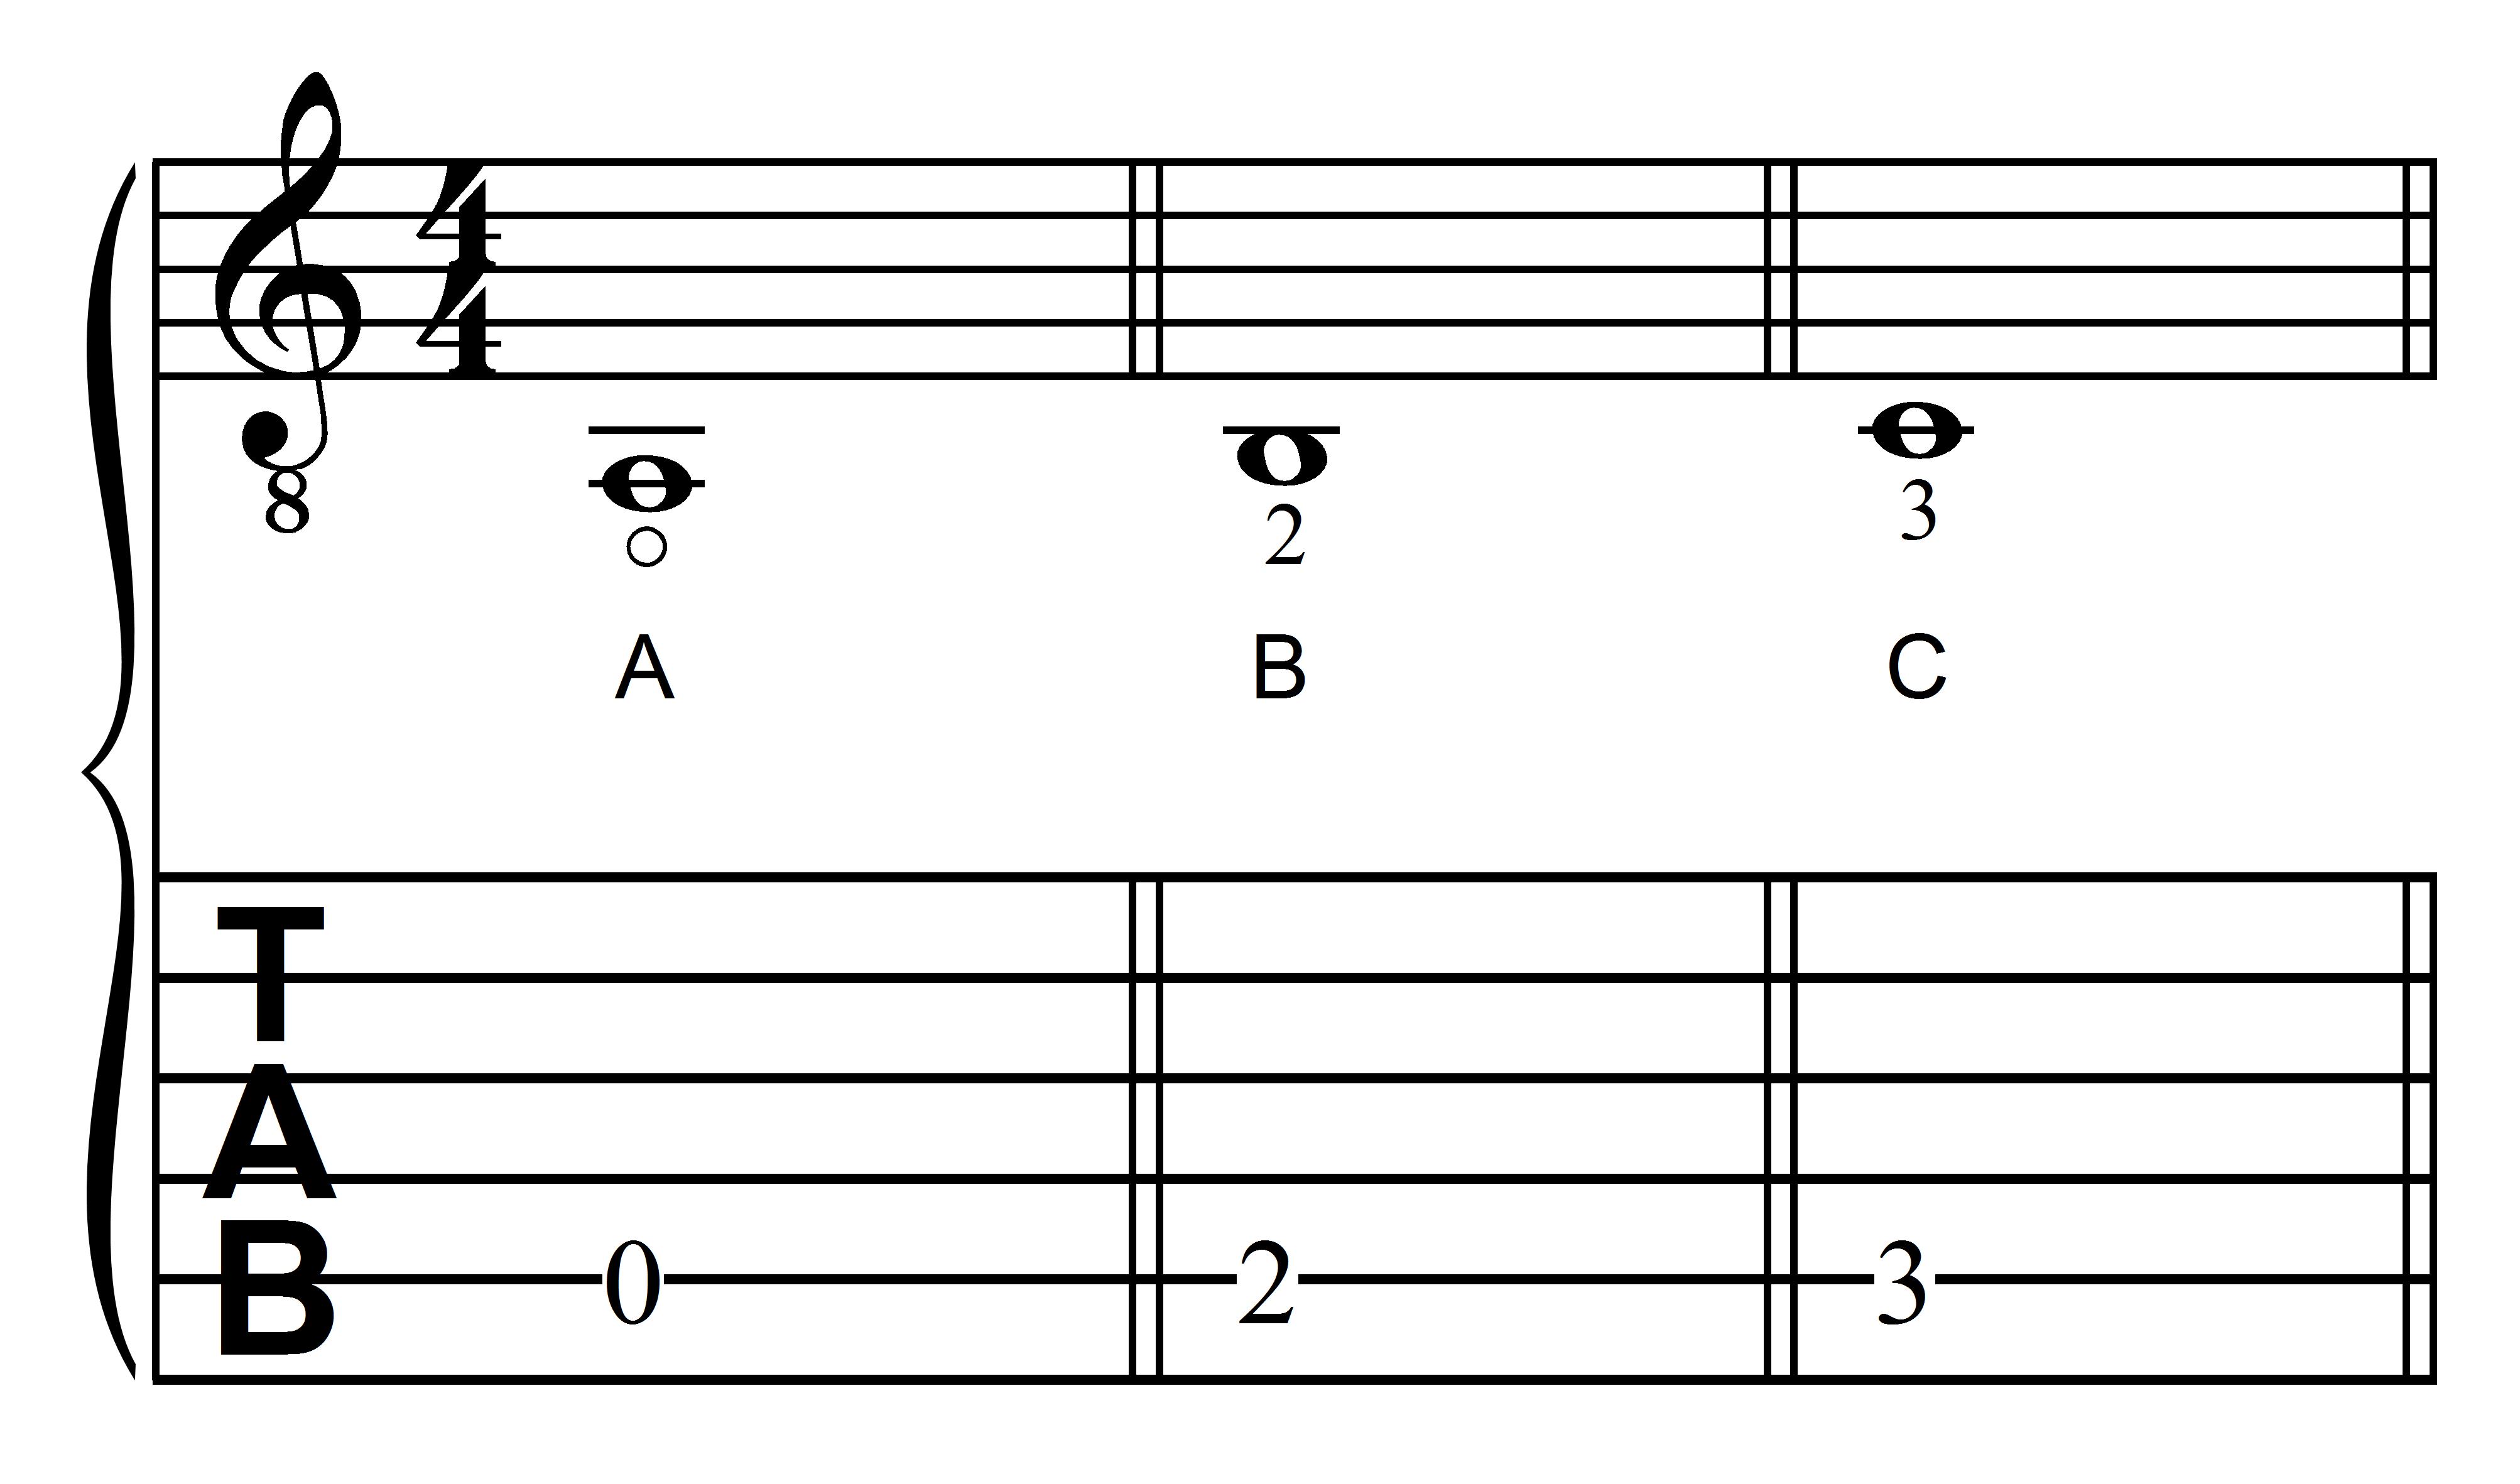 Learning Guitar Notes: A, B, and C in First Position on the Fifth String of the Guitar